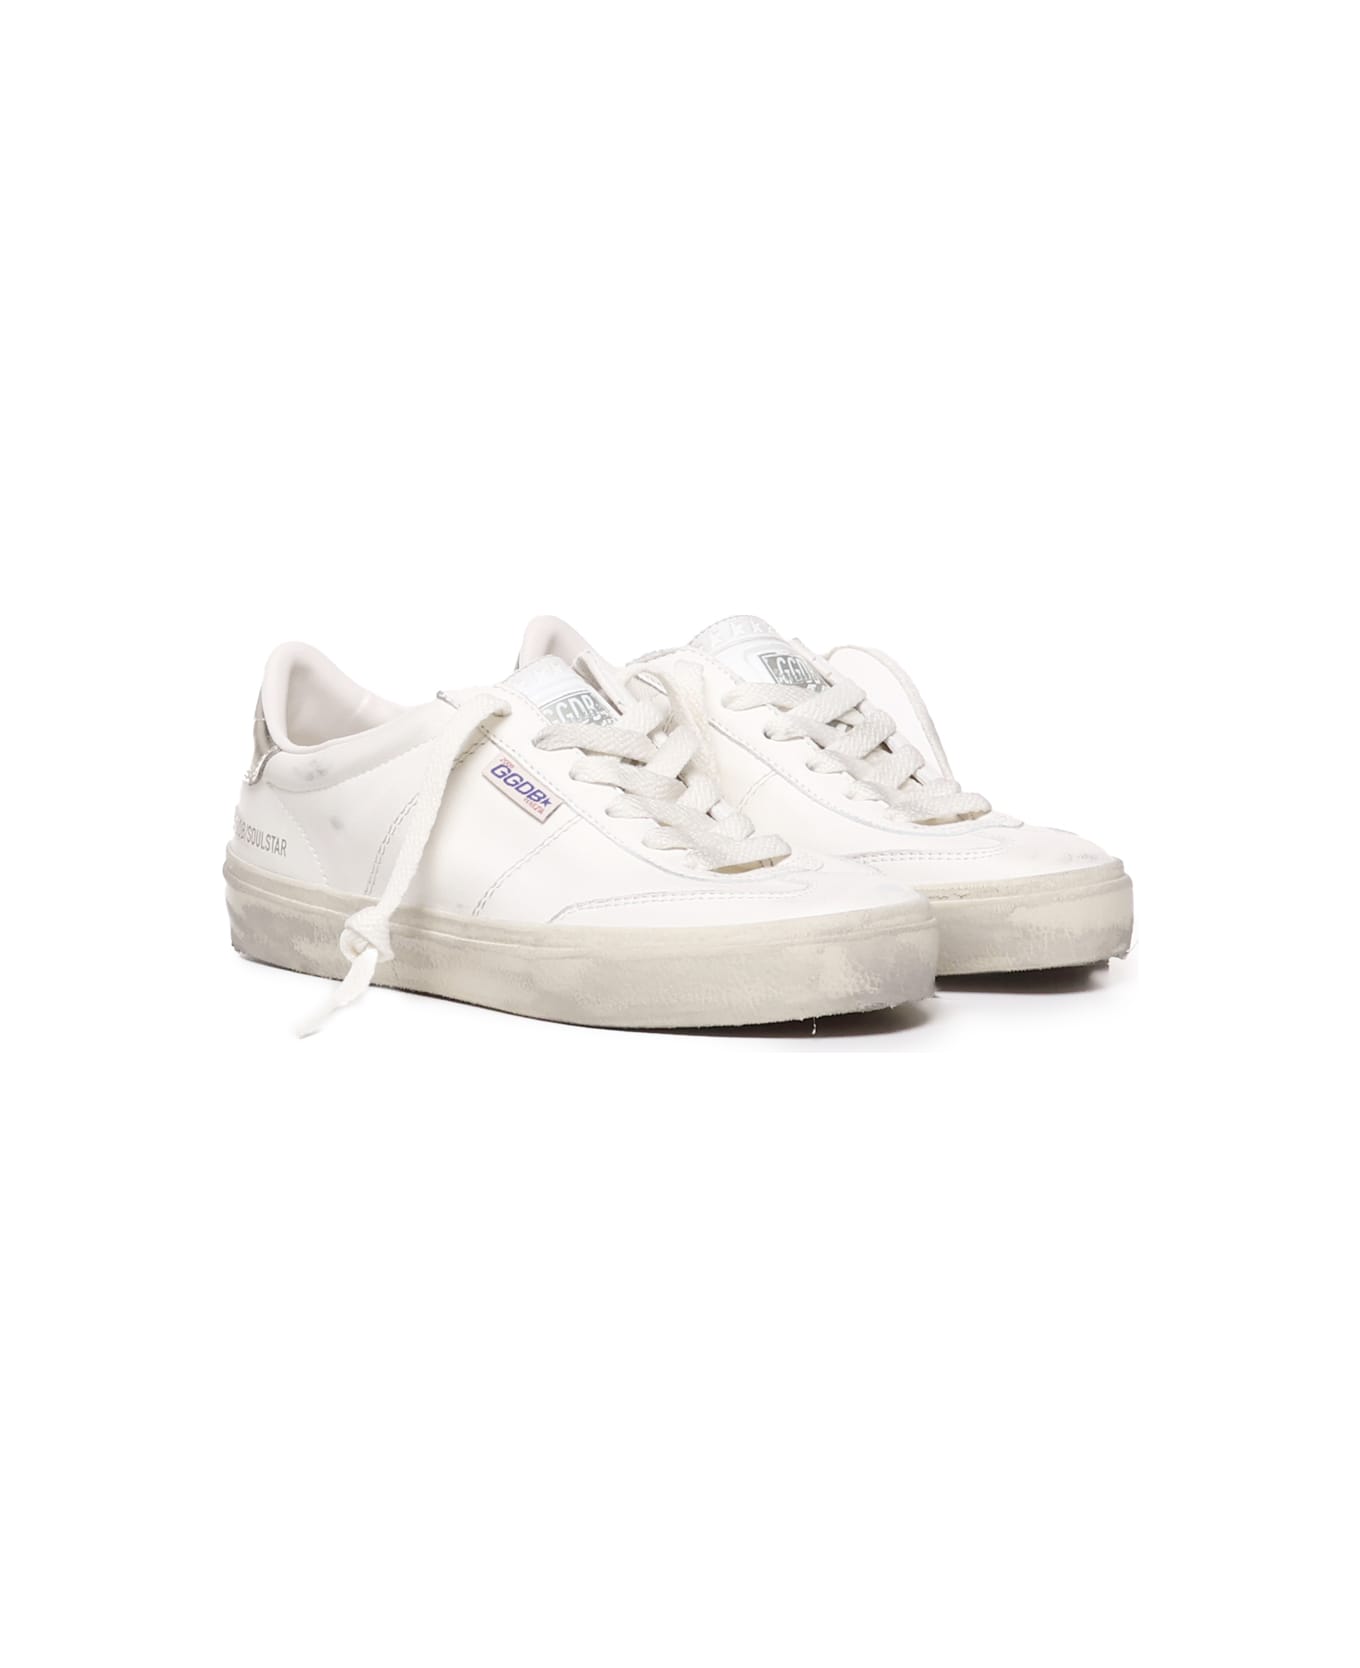 Golden Goose Soul Star Leather crisi - WHITE/GOLD